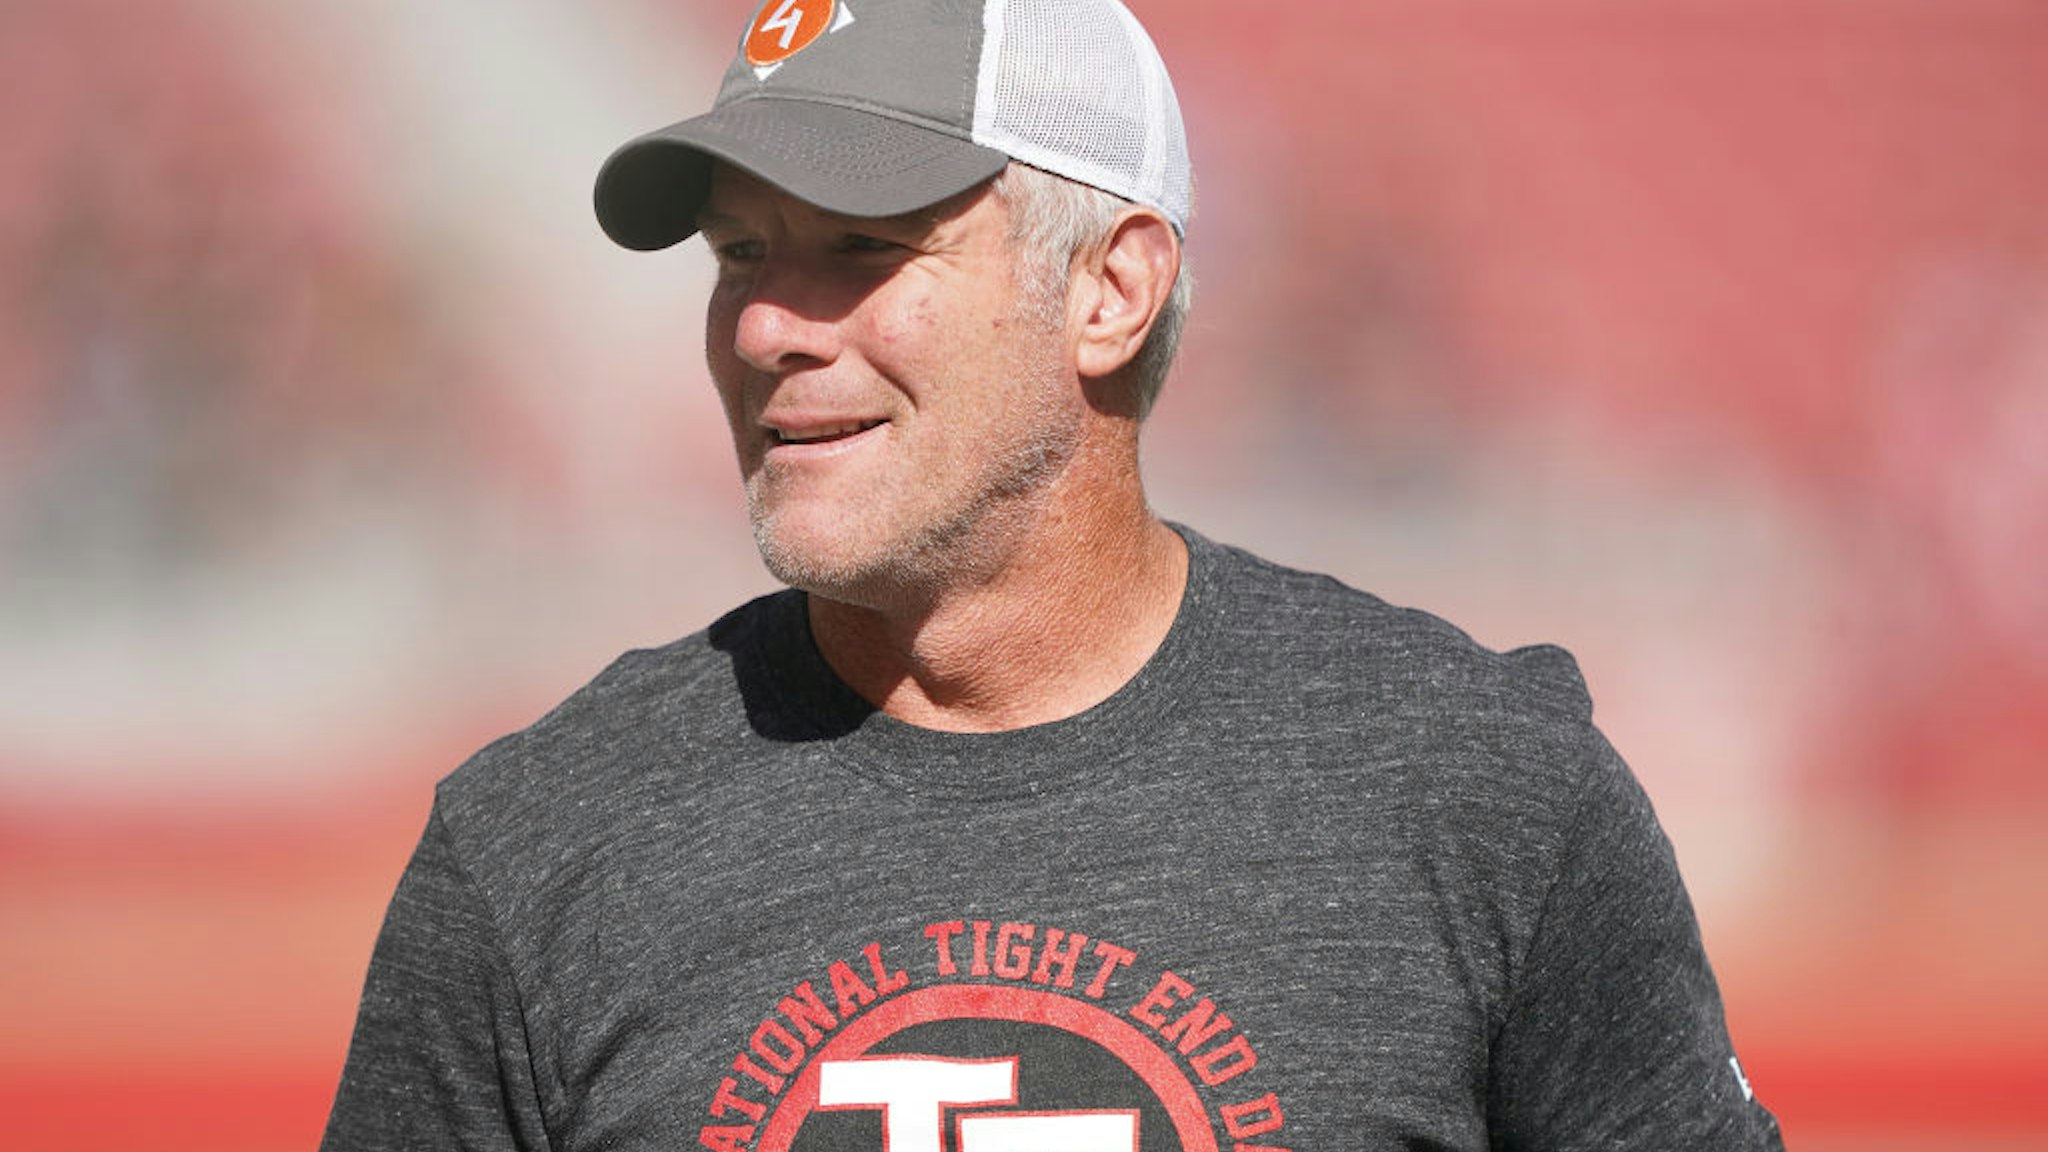 SANTA CLARA, CALIFORNIA - OCTOBER 27: Former NFL quarterback Brett Favre wears a t-shirt that reads "National Tight End Day" prior to the start of an NFL game between the Carolina Panthers and San Francisco 49ers at Levi's Stadium on October 27, 2019 in Santa Clara, California. (Photo by Thearon W. Henderson/Getty Images)